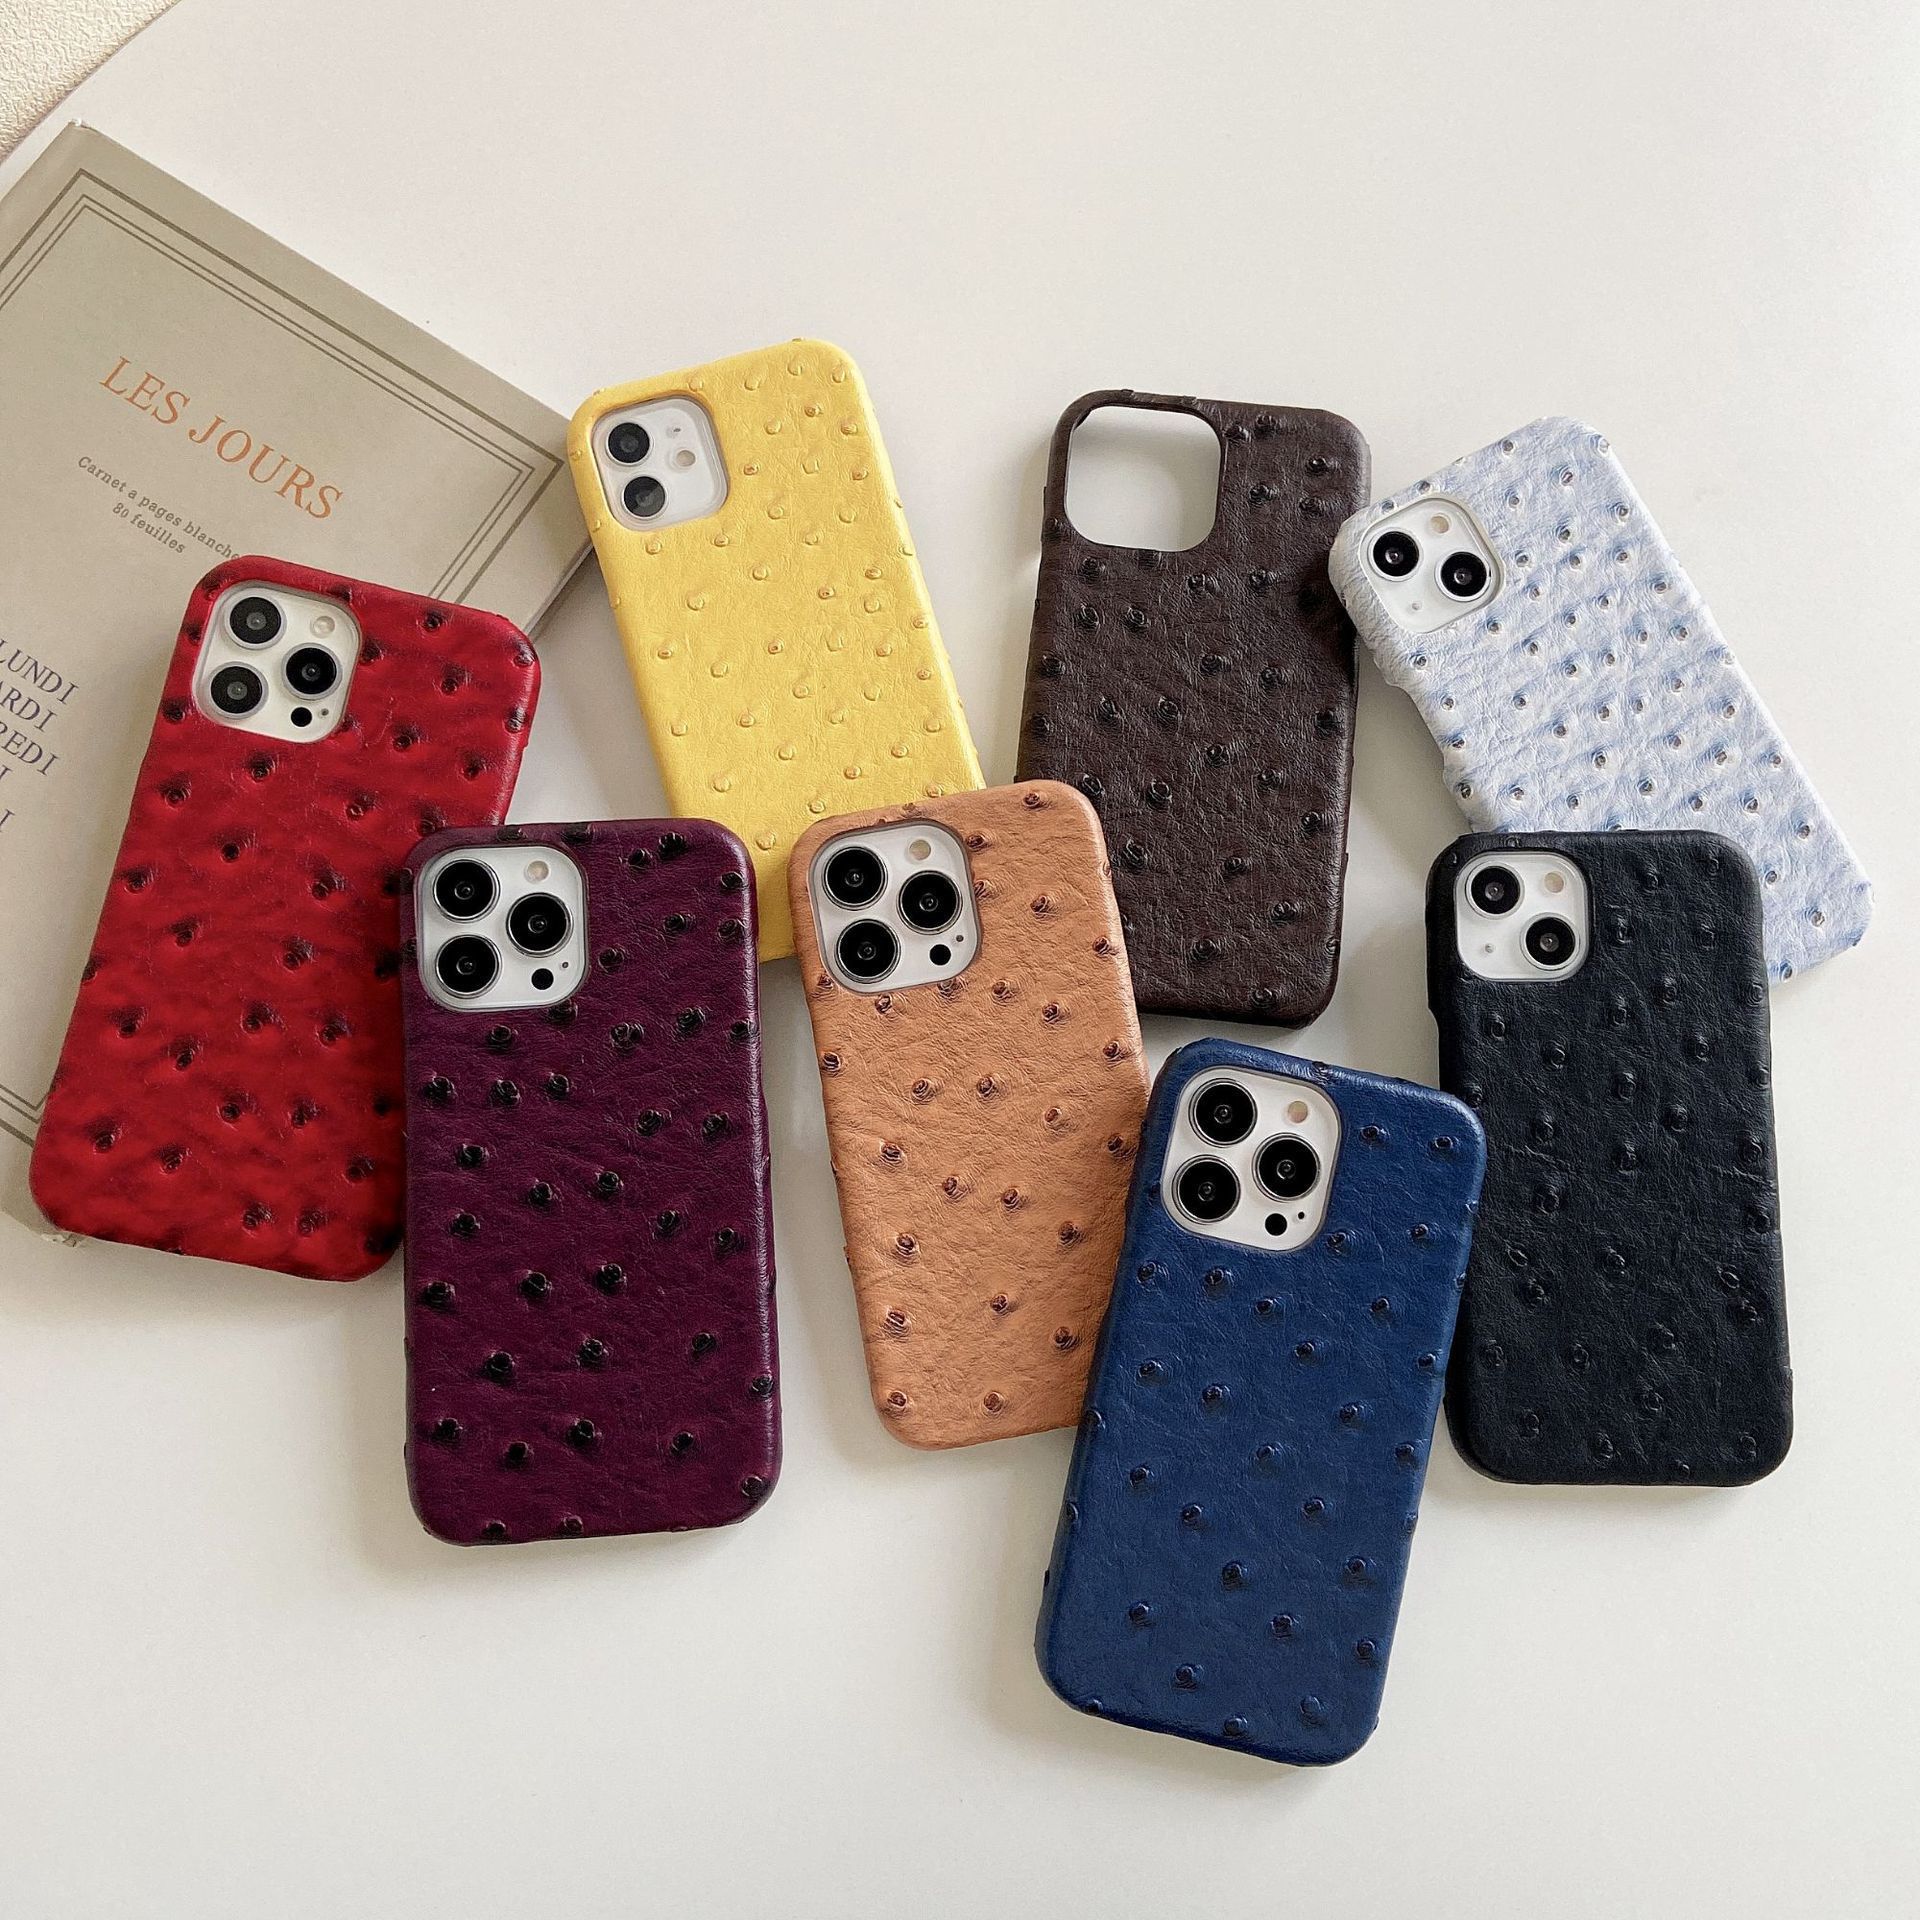 ins style leather phone covers for iphone